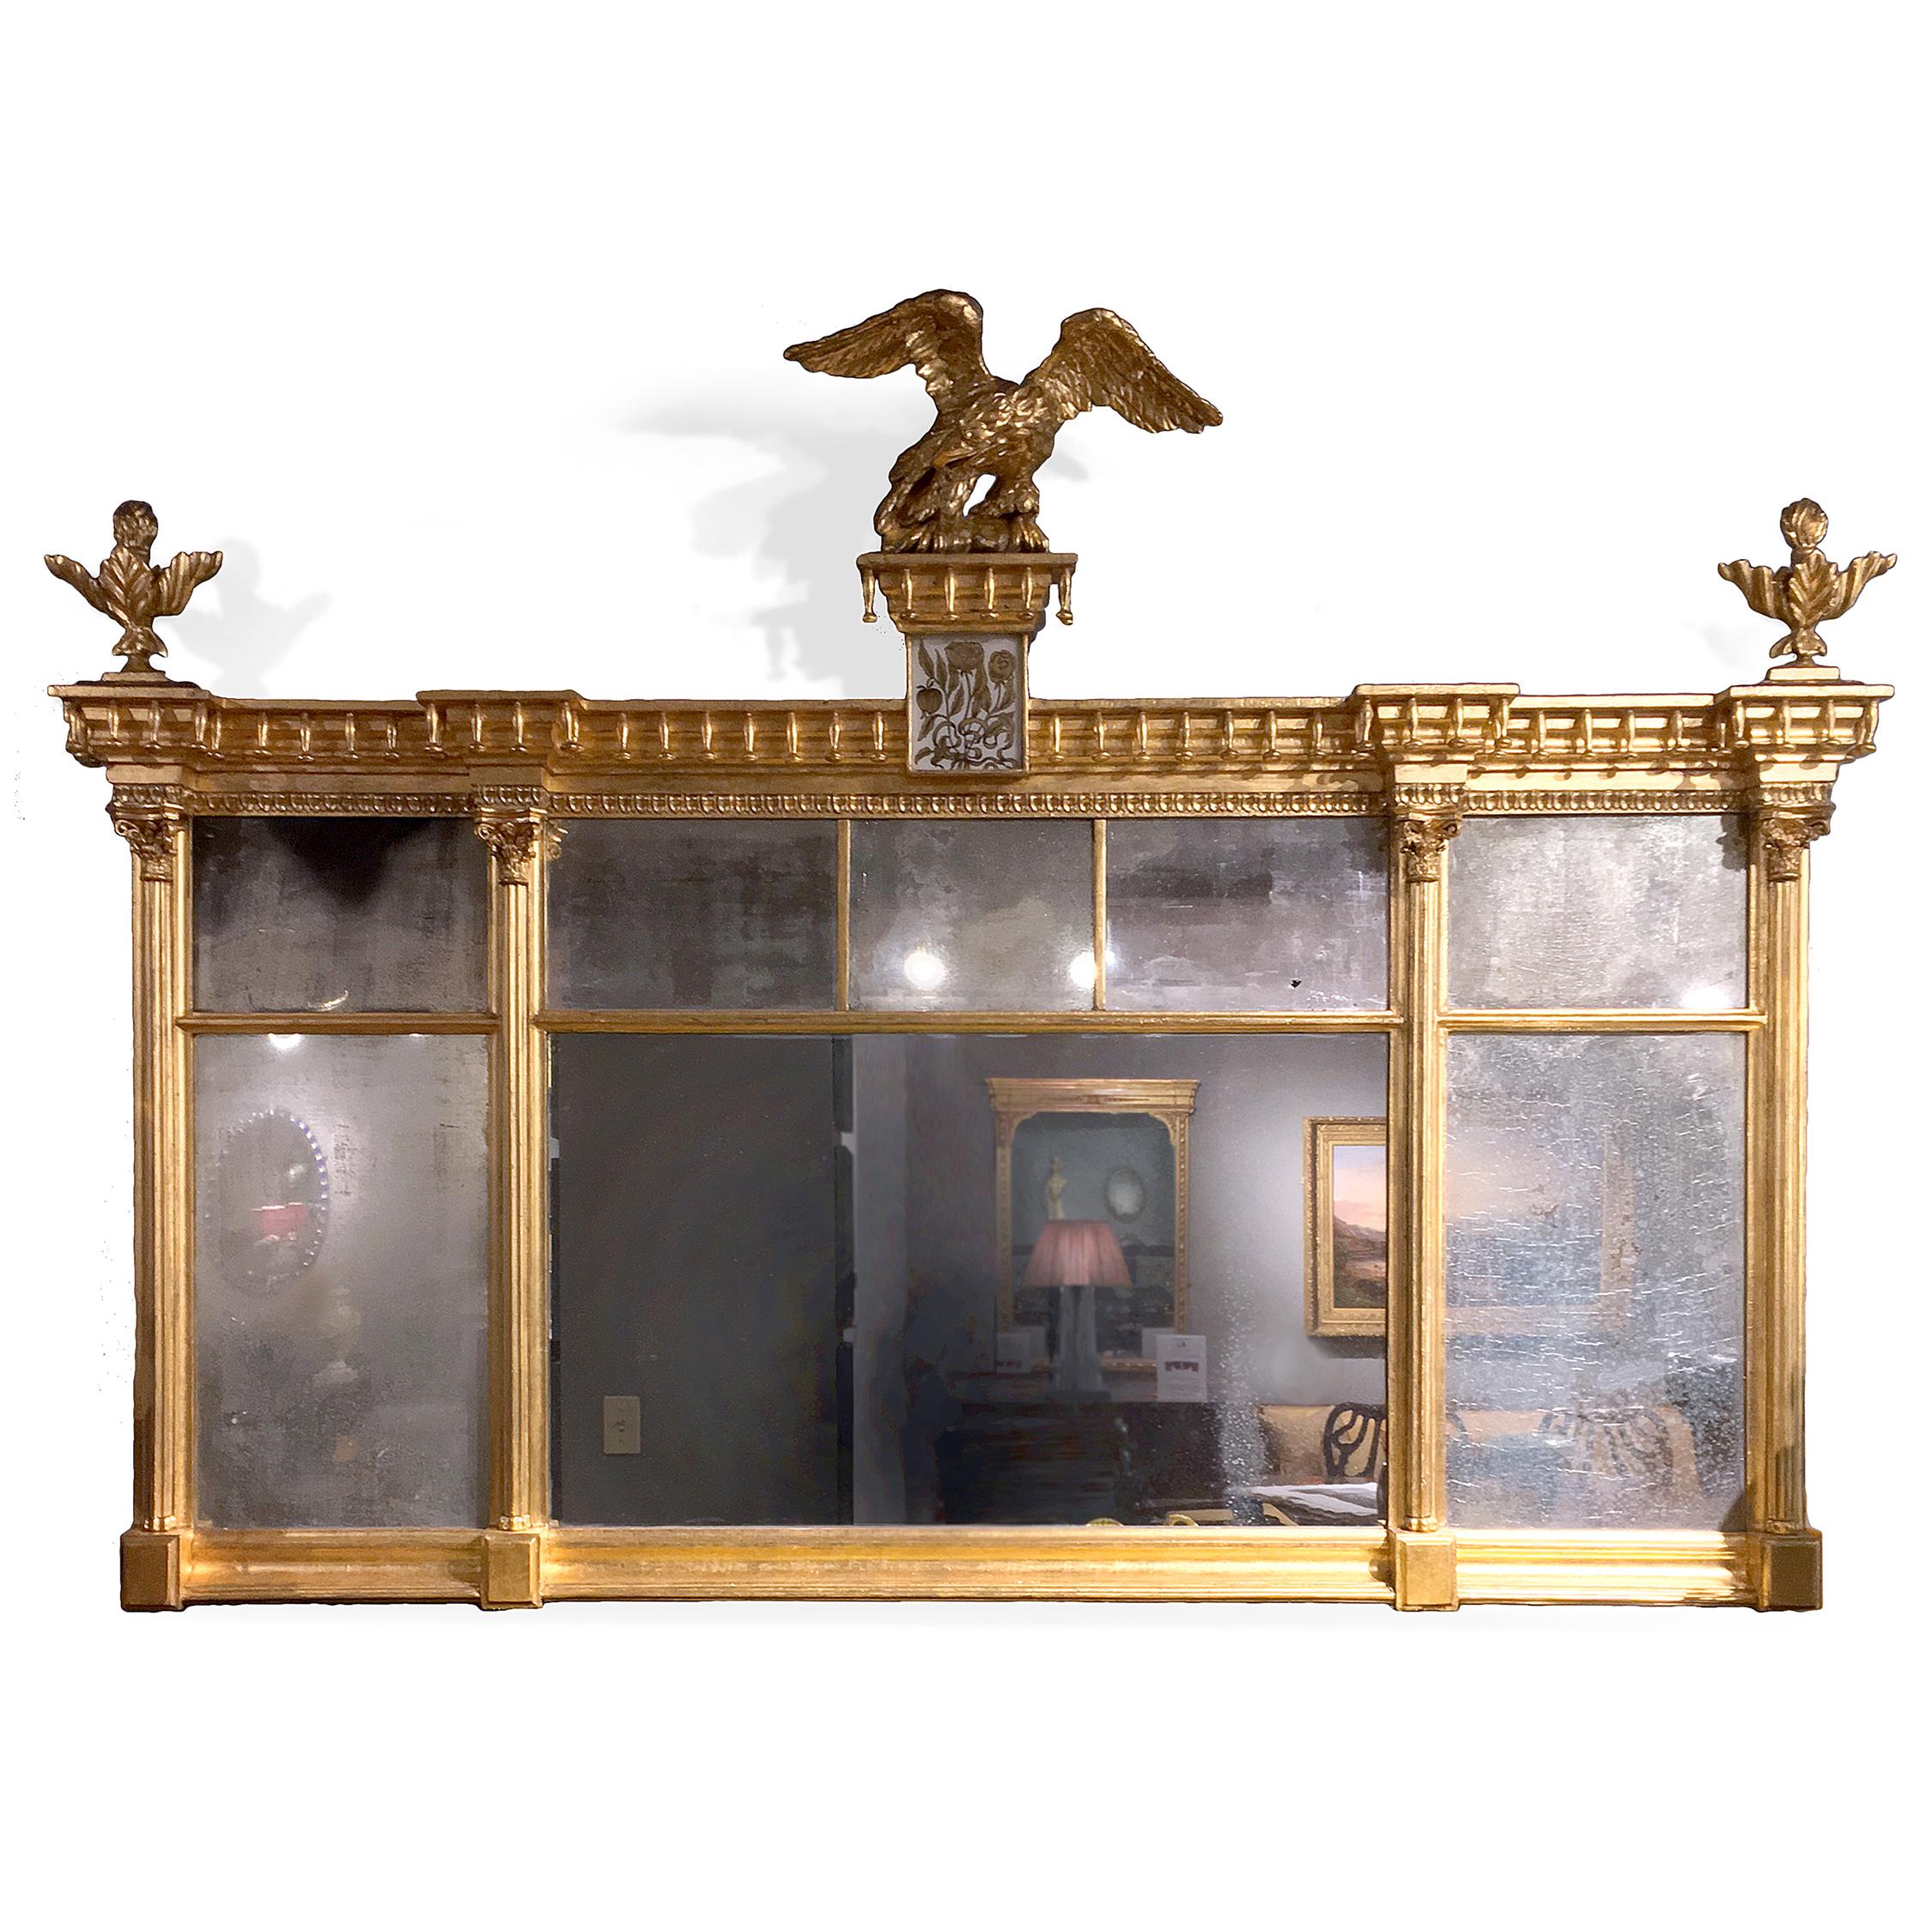 This American Federal-period overmantel composition mirror features a gilt carved wood and gesso frame. A sculpted eagle is perched above an églomisé panel depicting flowers. Separating the panels of original mirror glass are engaged Corinthian